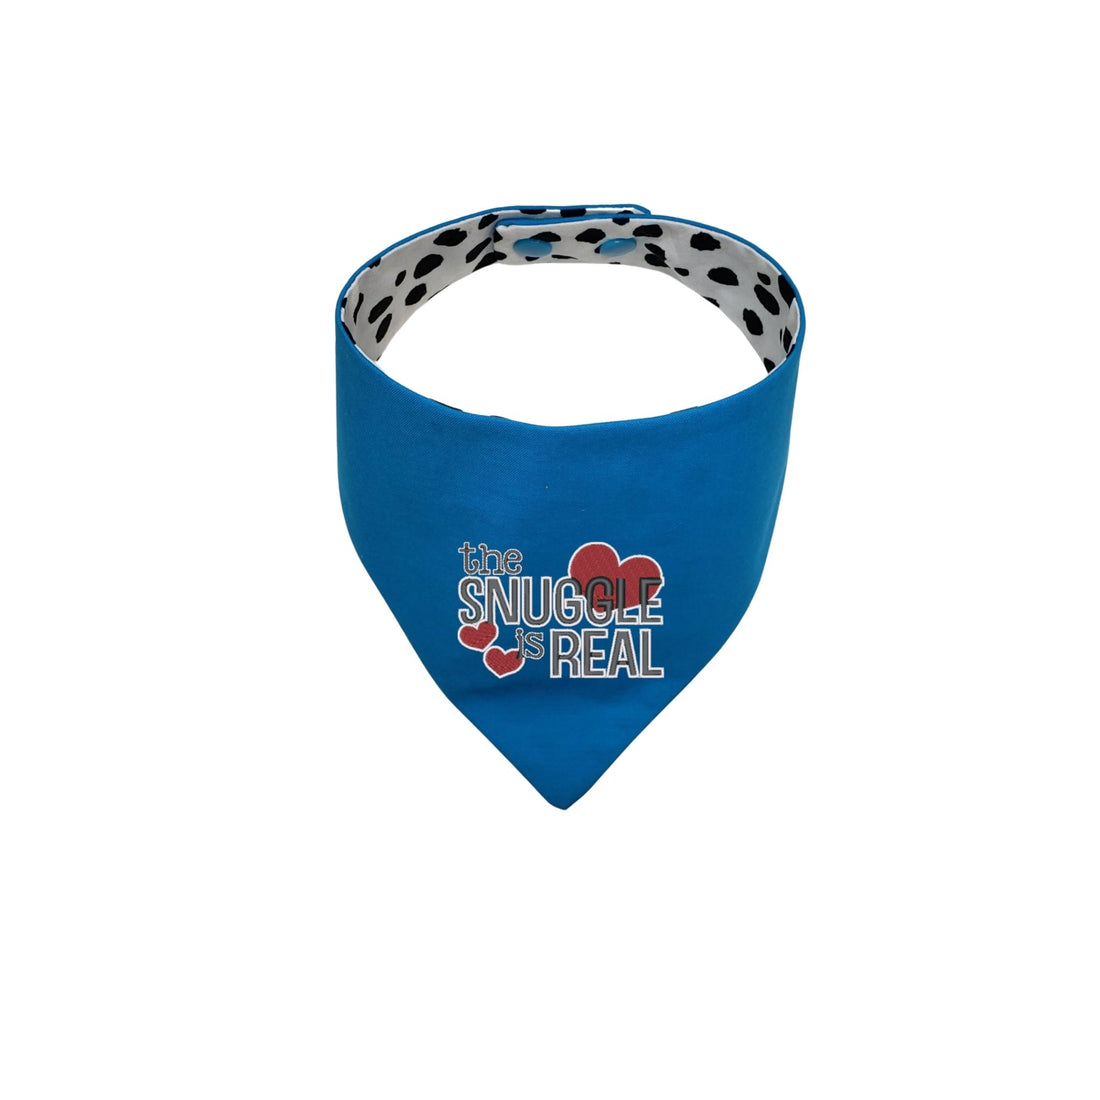 Aqua Blue Snuggle is Real embroidered reversible dog bandana with snaps - Life Has Just Begun